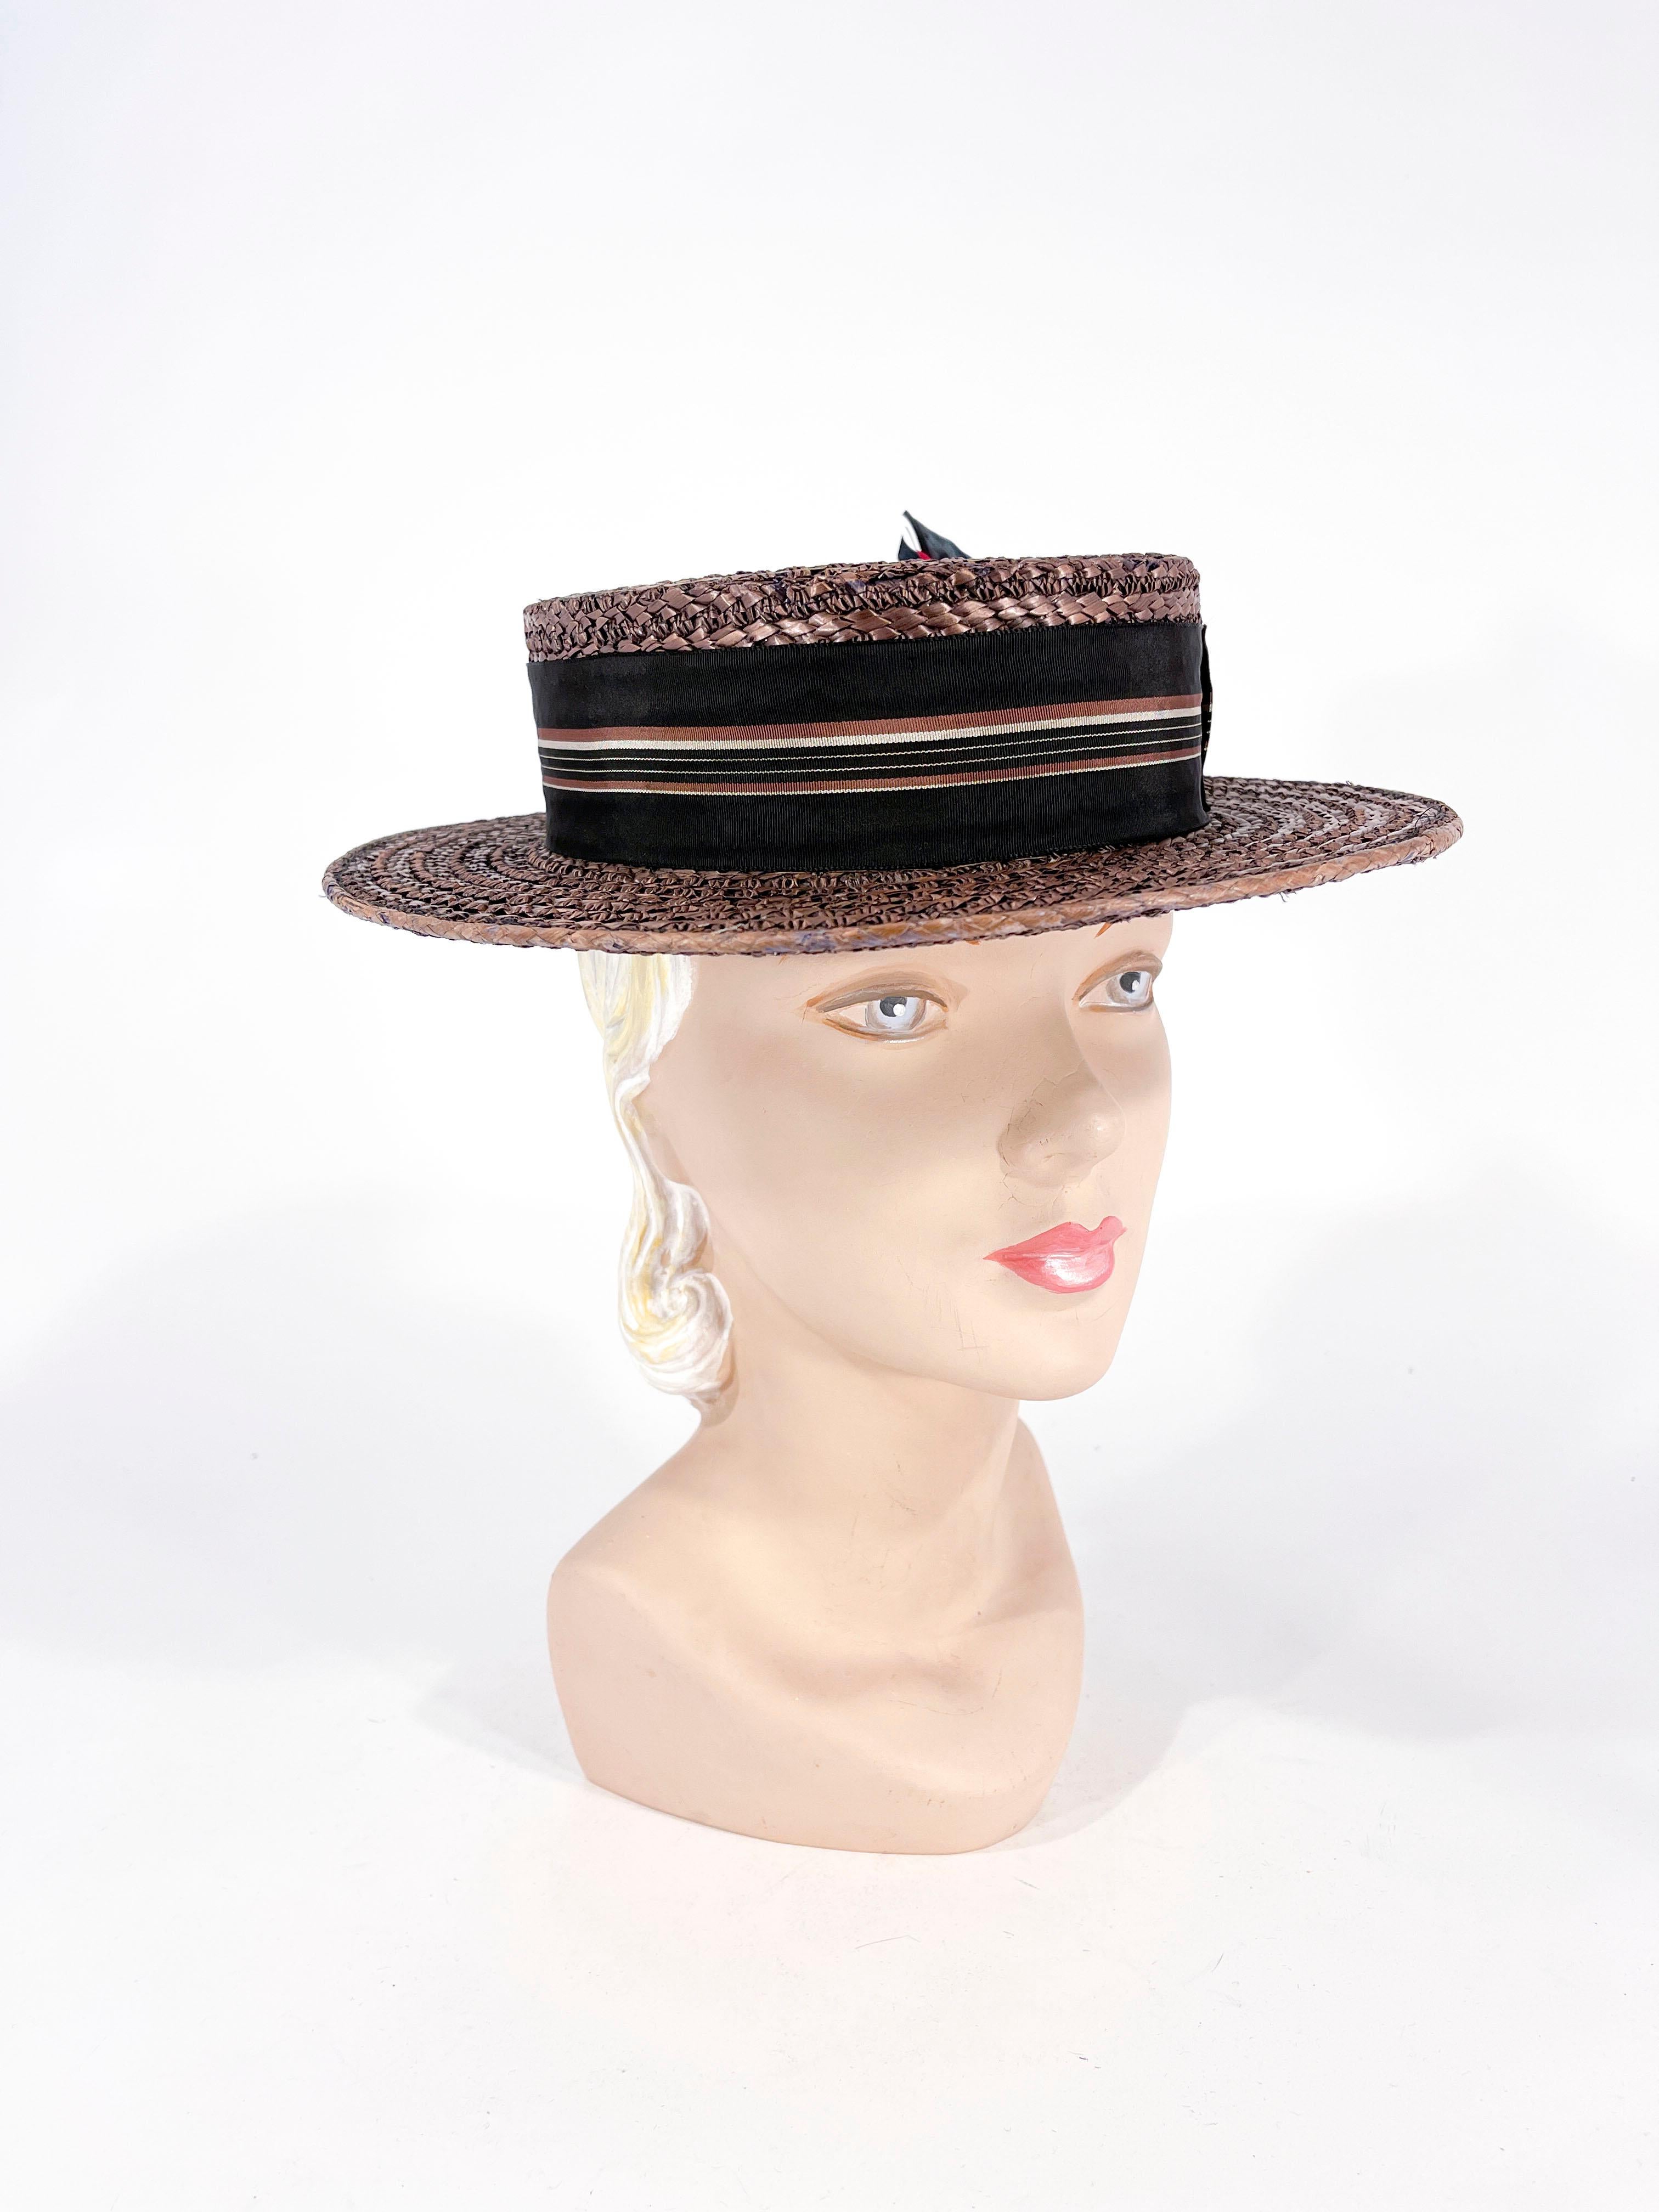 1920s Art Deco Ladies boater hat of handwoven straw that has been tinted a cocoa brown color. The shallow crown of the hat is decorated with a multi-striped and colored grosgrain hat band and an enlarged handmade bow finished with a feather accent.